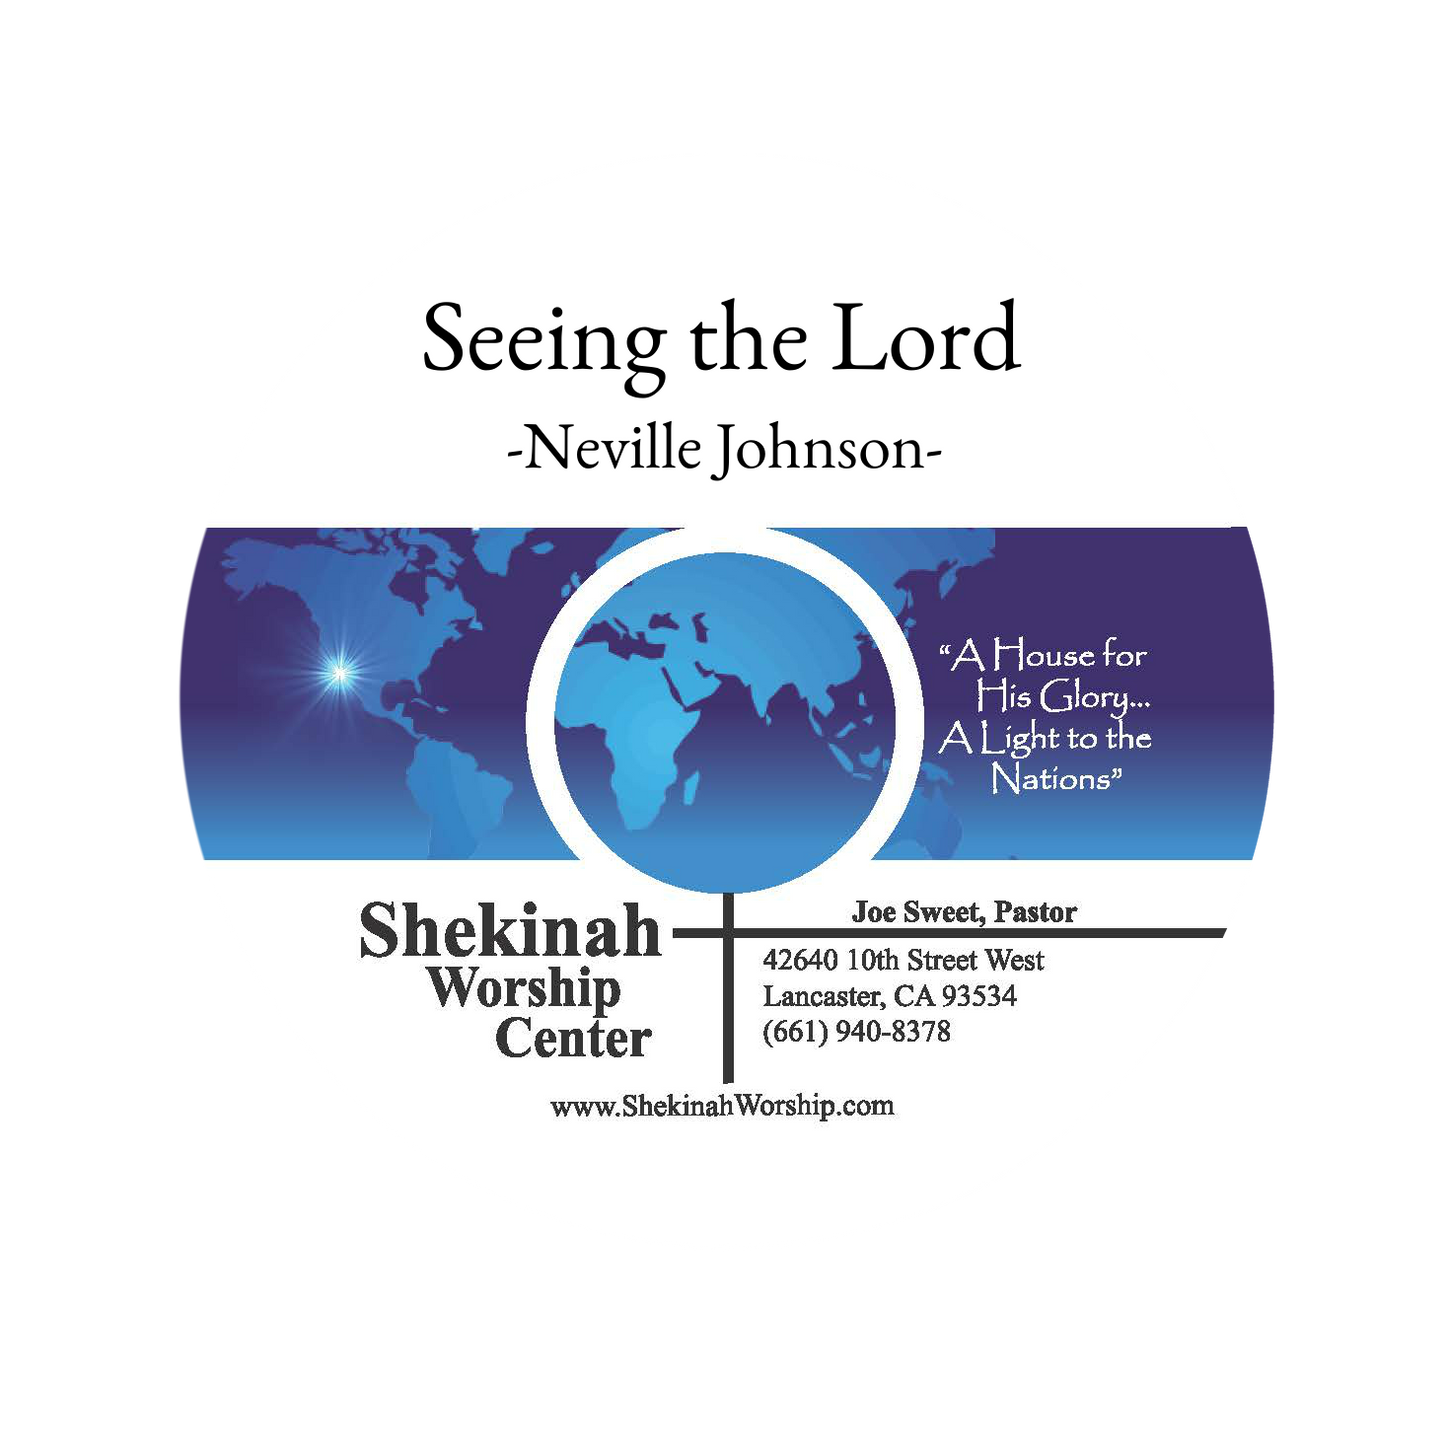 Seeing the Lord - Neville Johnson CD